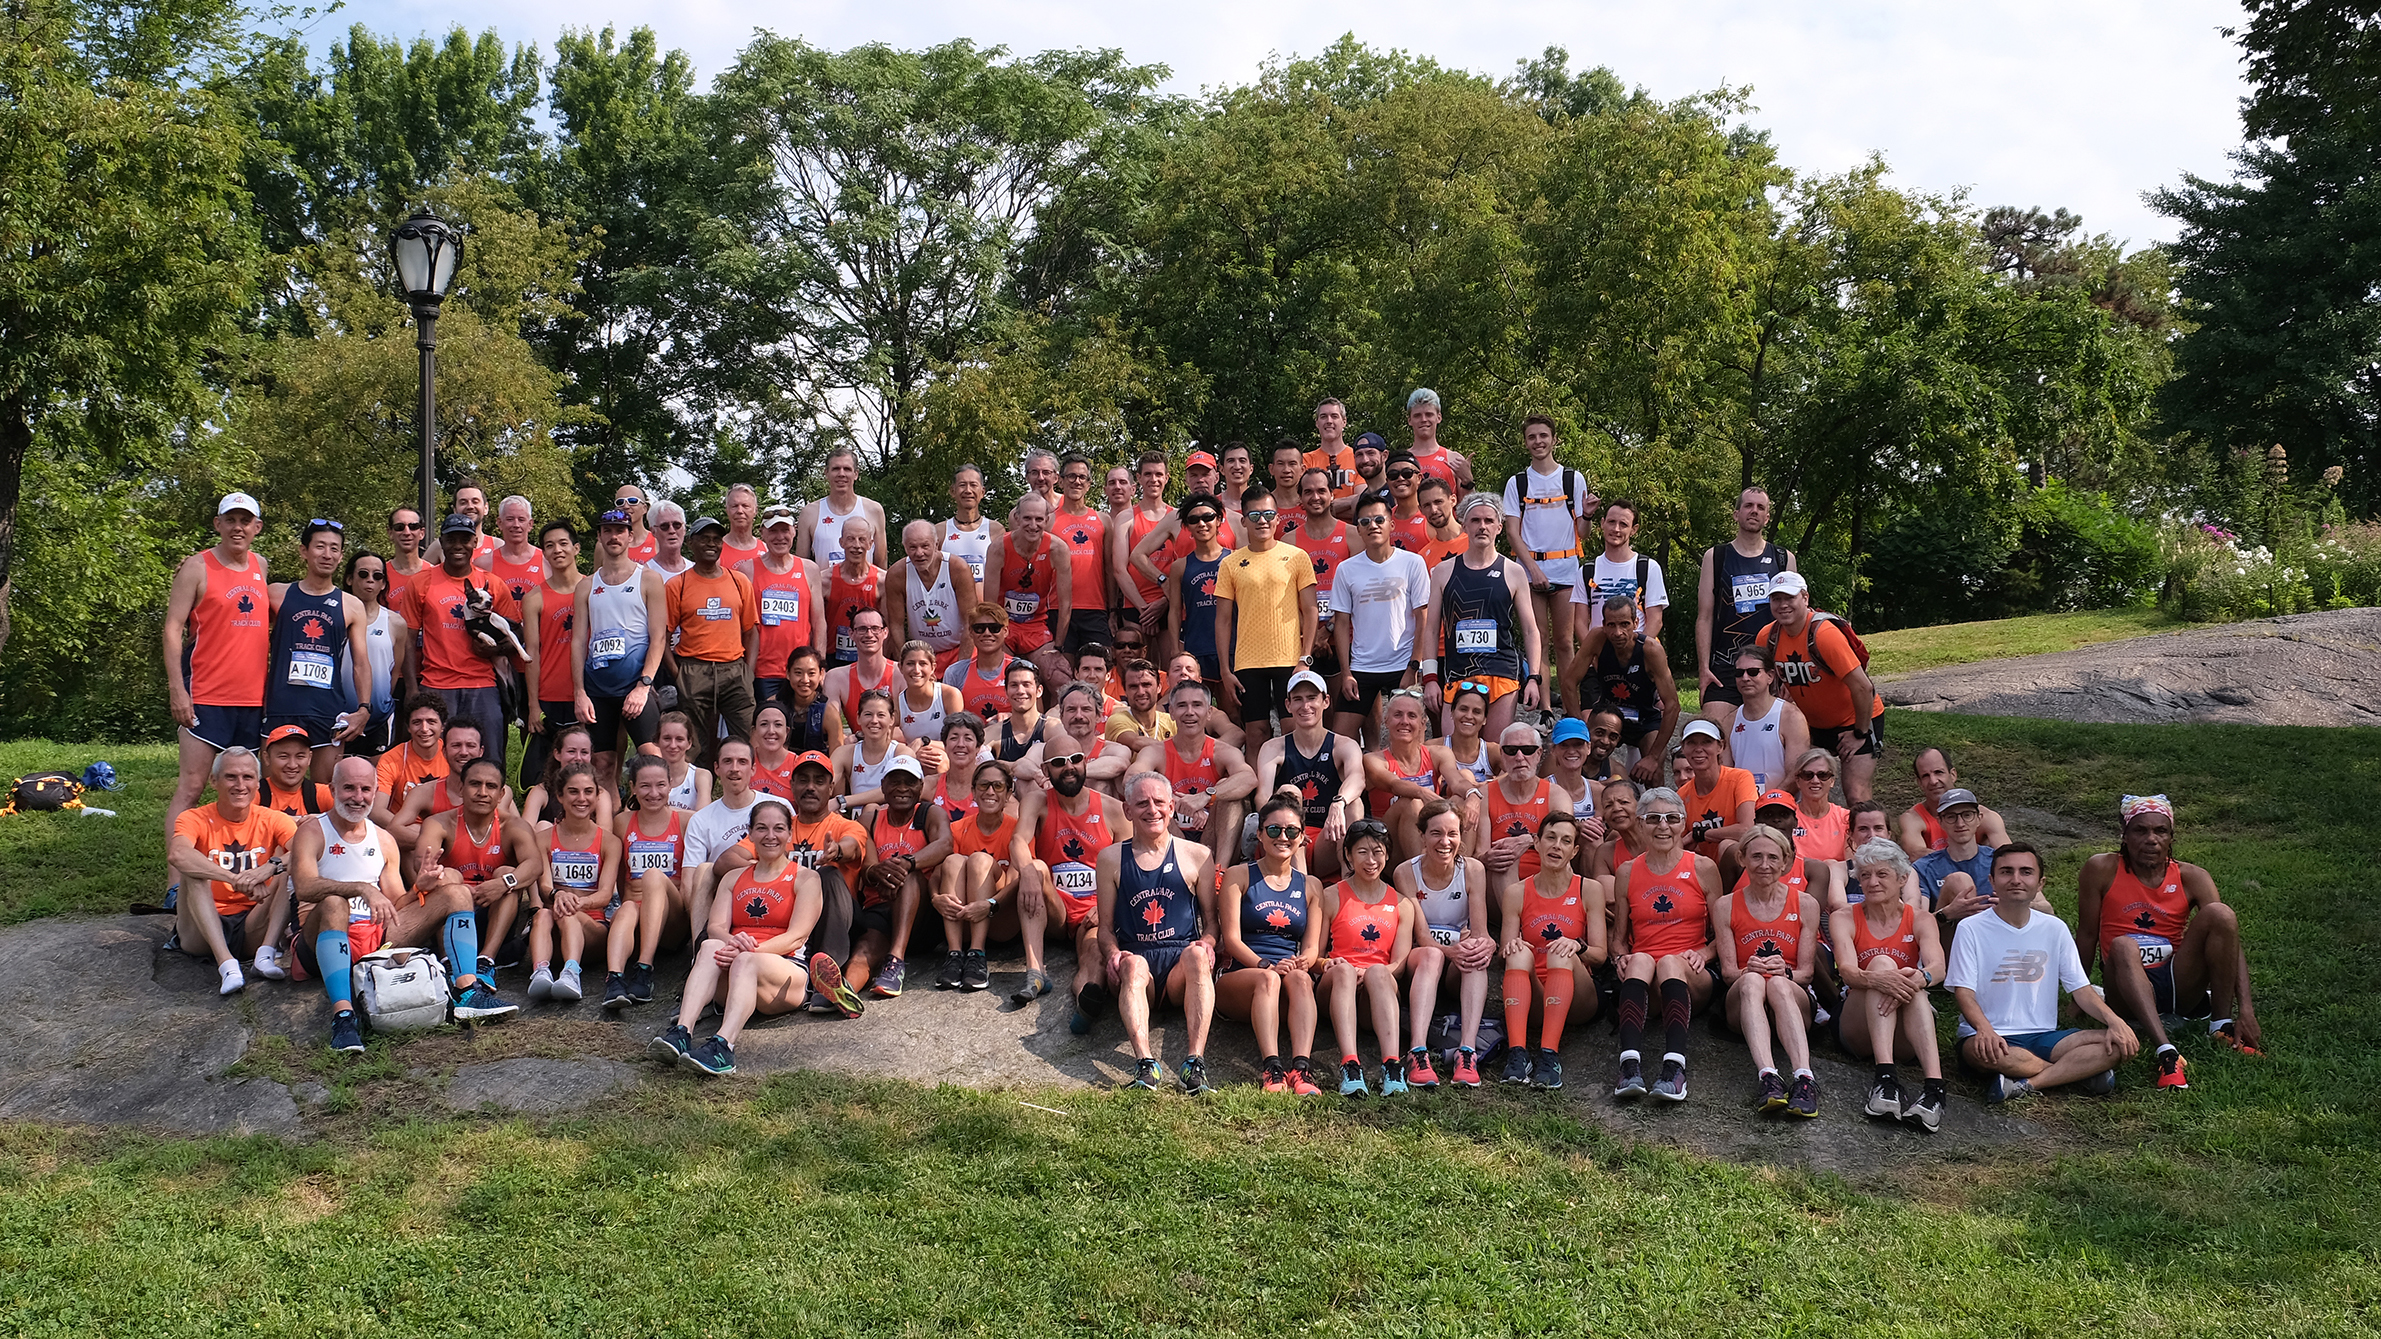 About – Central Park Track Club